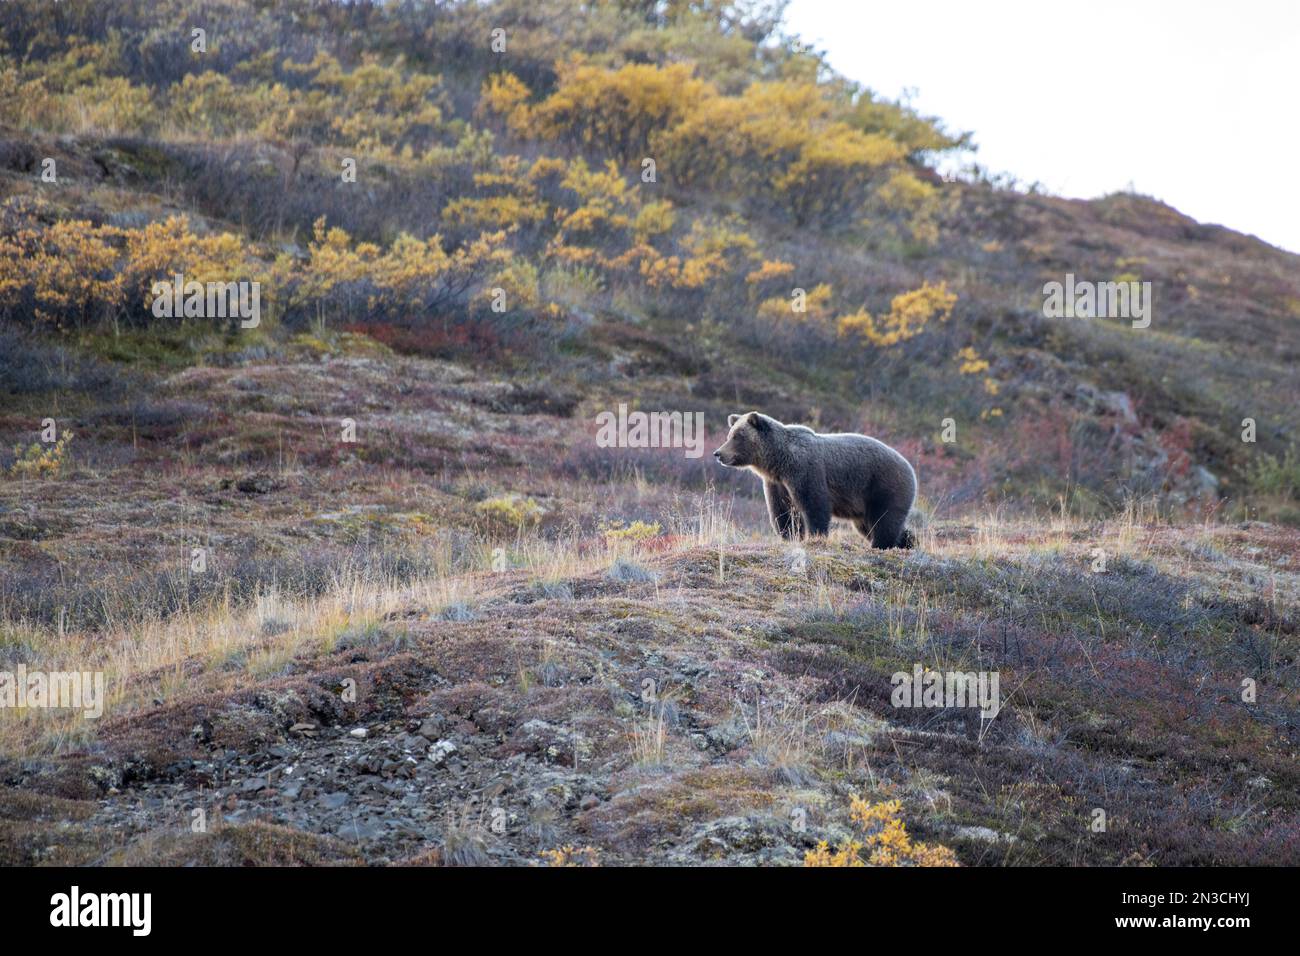 Grizzly Bear (Ursus arctos horribilis) walking through the fall colored vegetation on the tundra in autumn Stock Photo